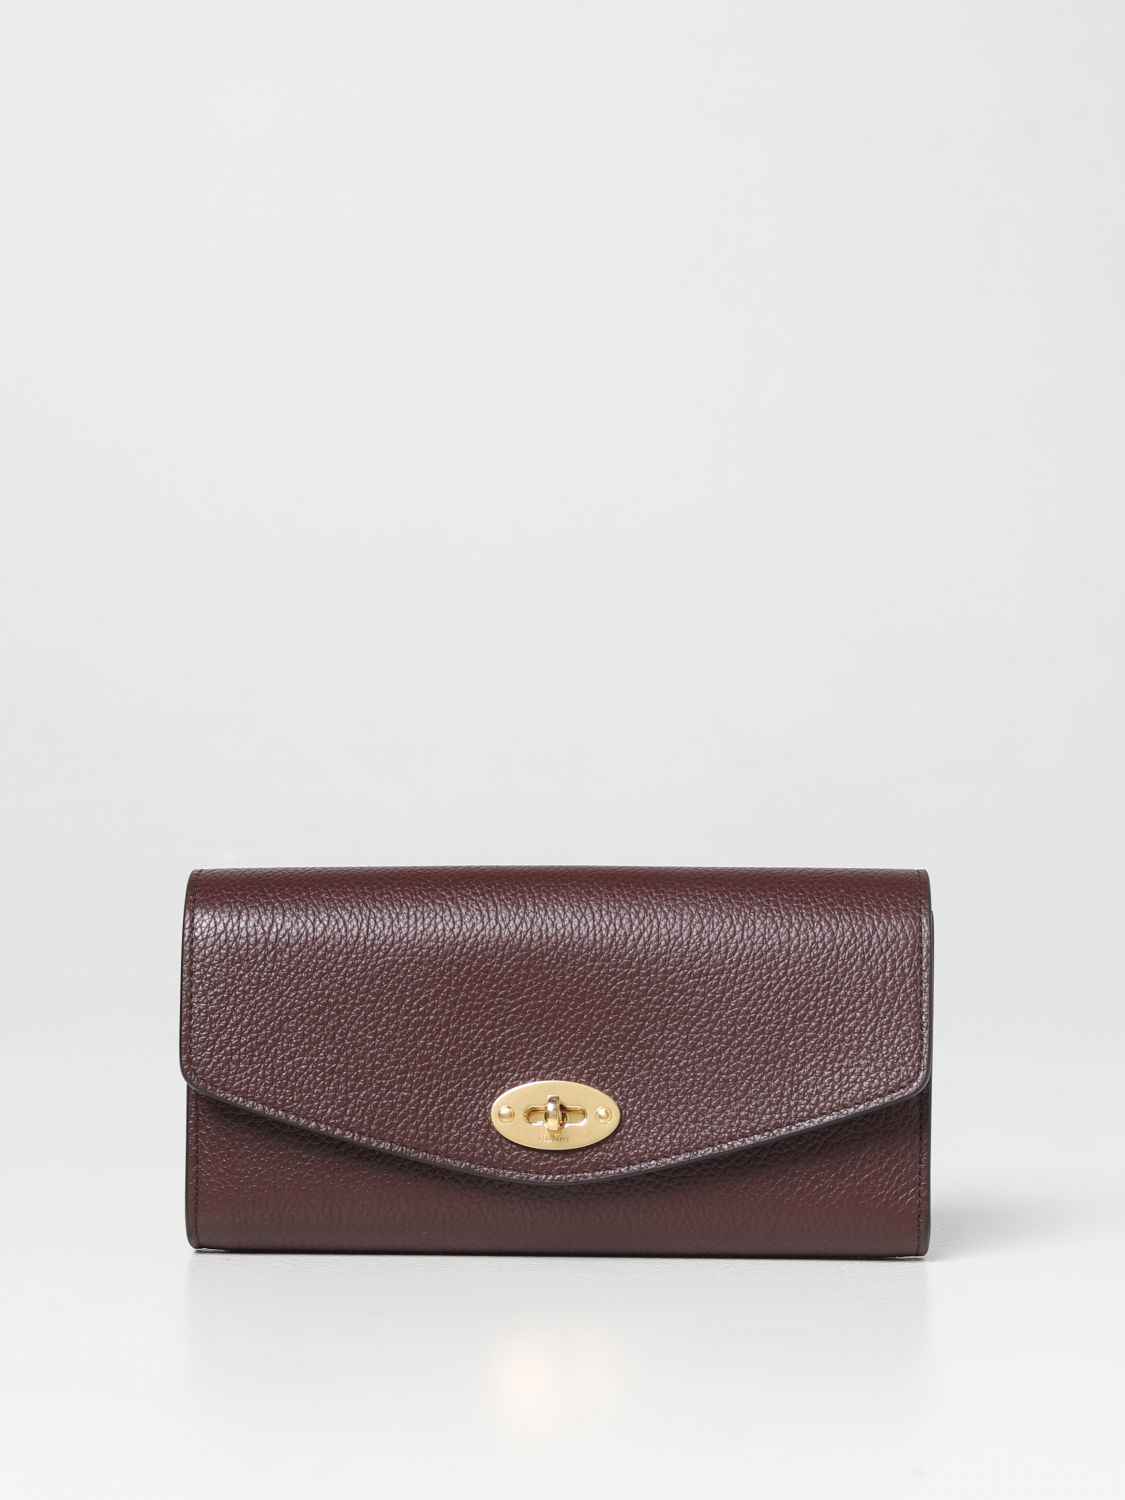 MULBERRY WALLET MULBERRY WOMAN COLOR PLUM,E48027089